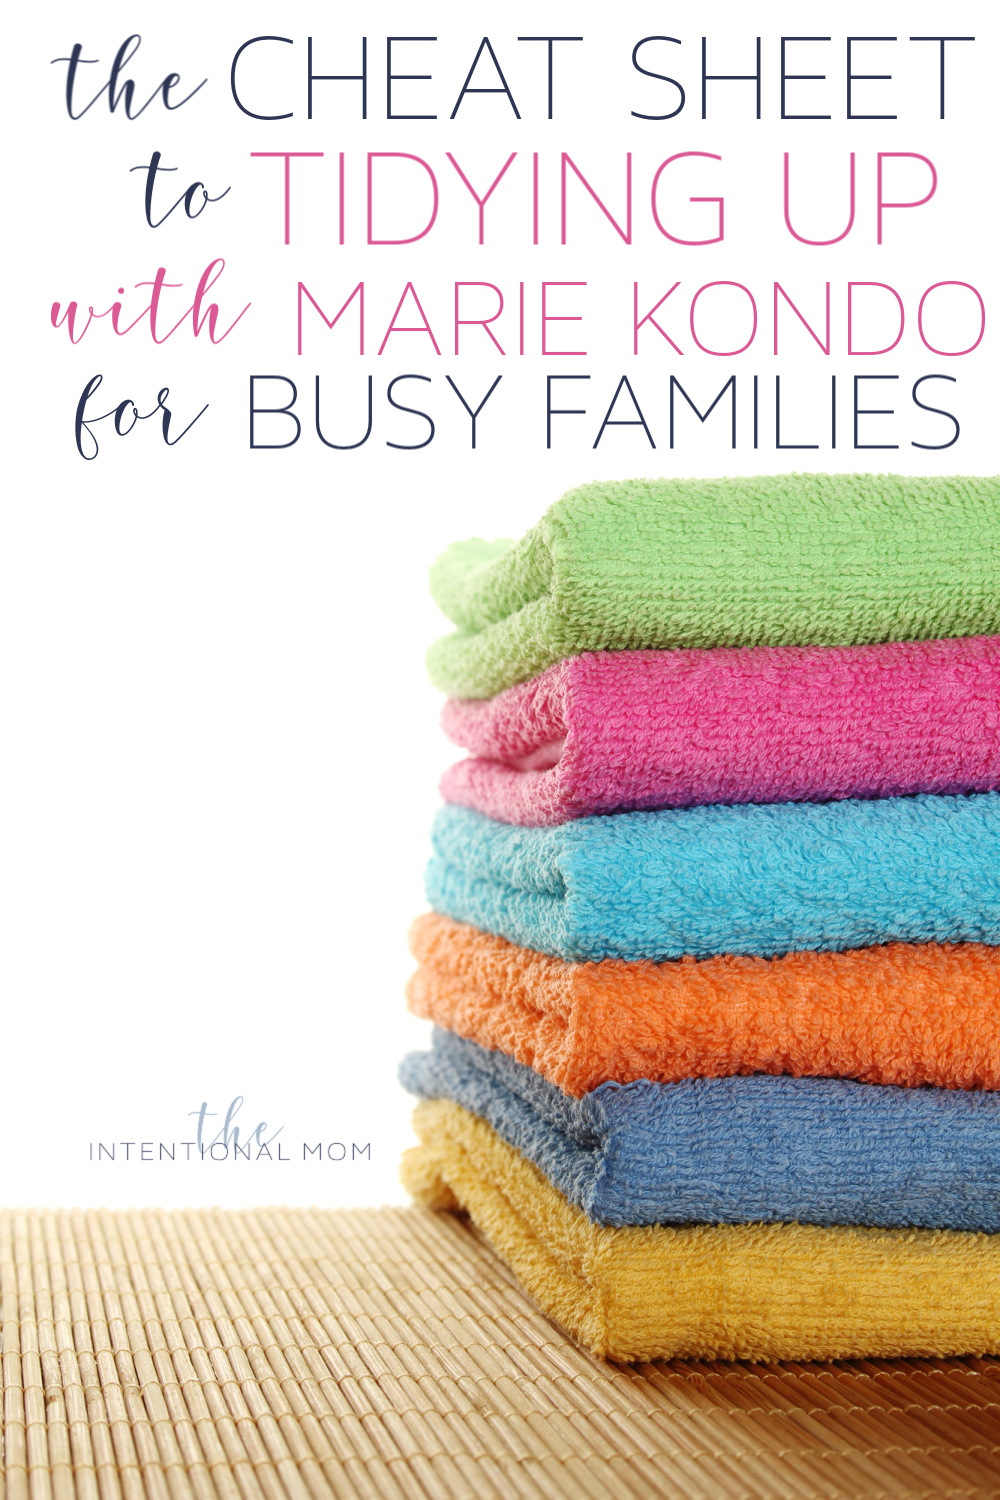 The Cheat Sheet to Tidying Up With Marie Kondo For Busy Families